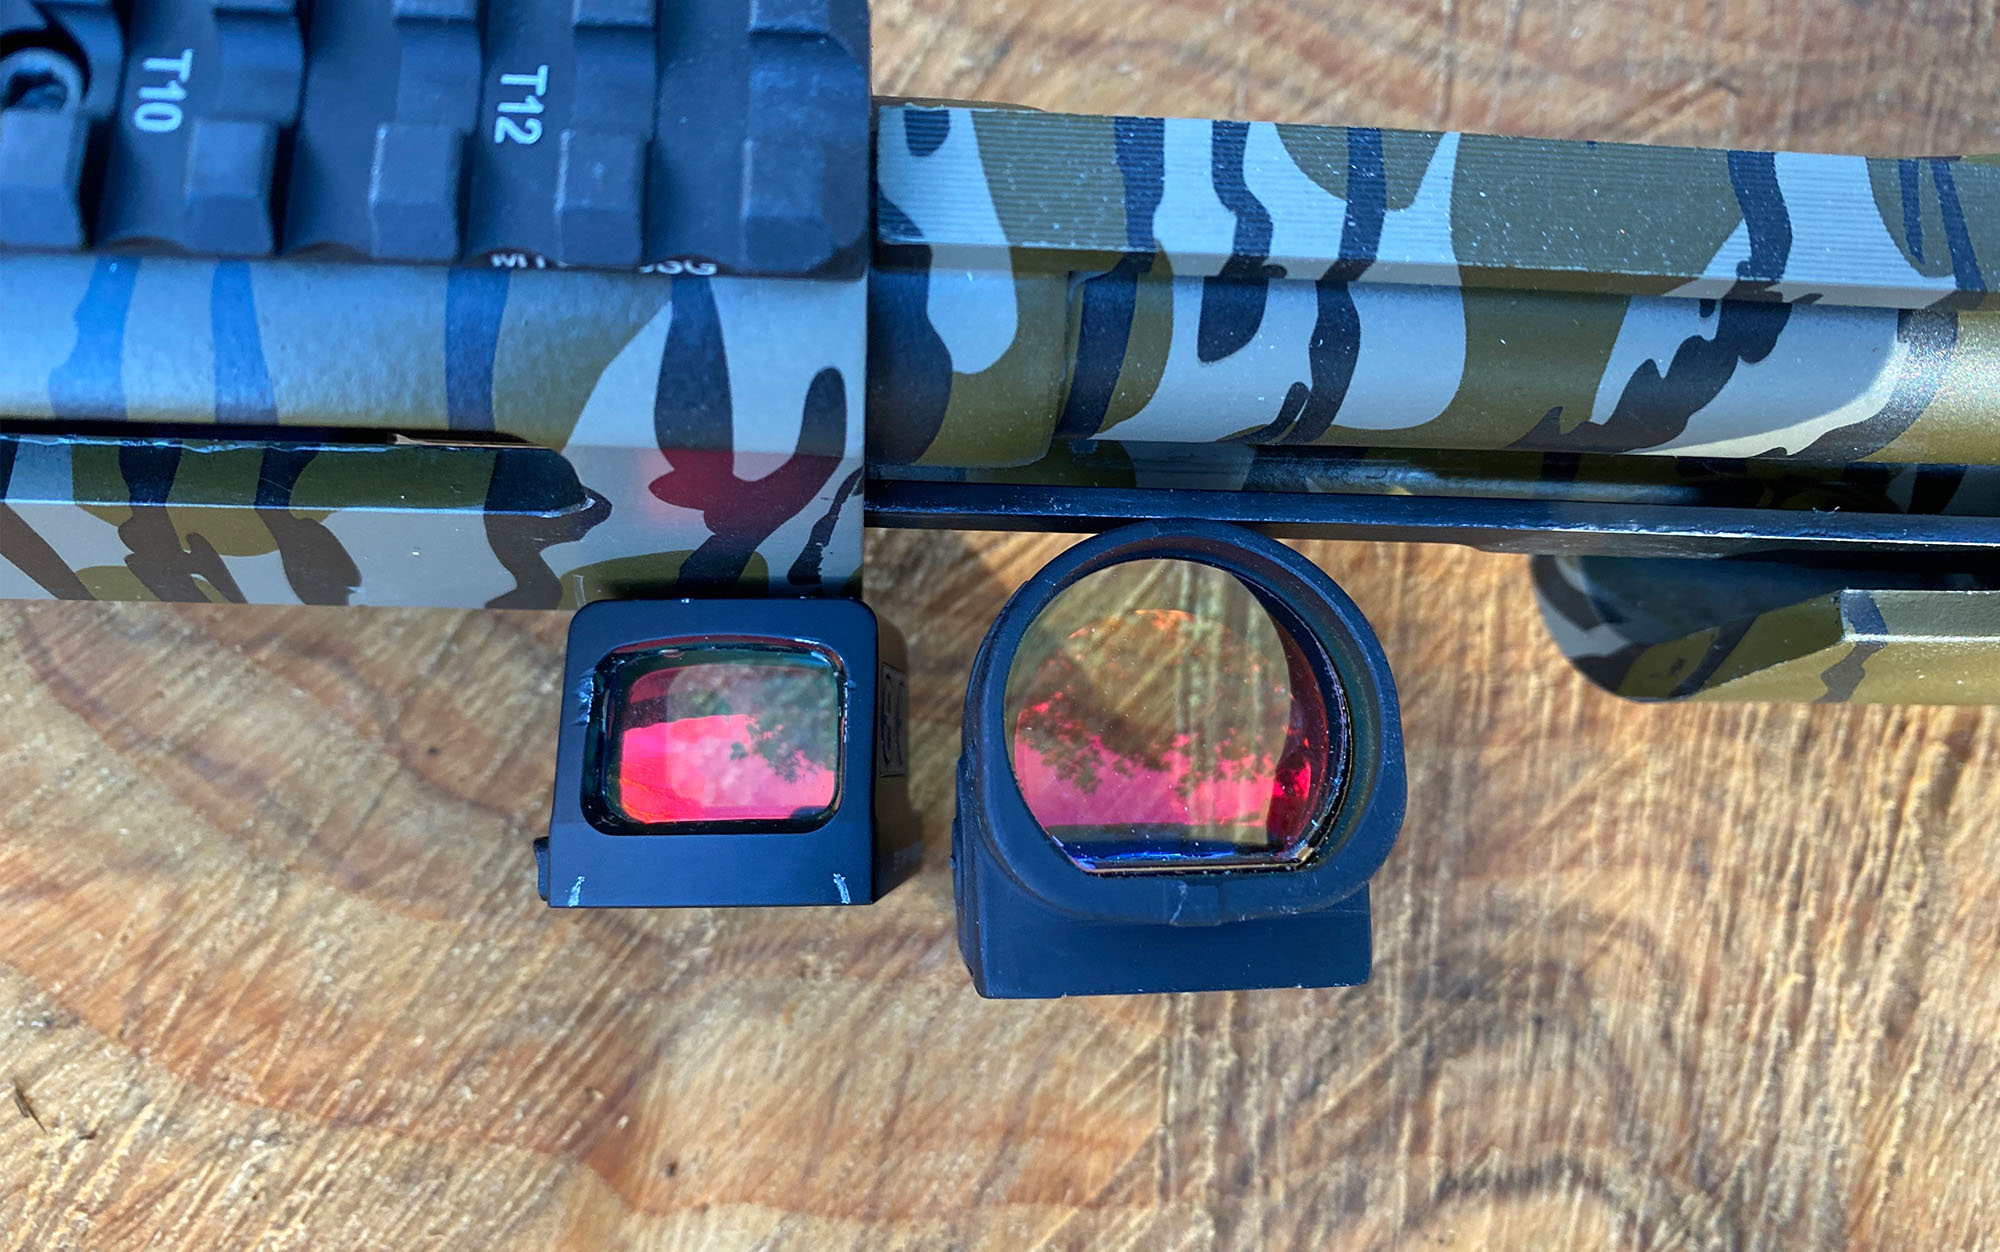 Window size is a concern when choosing the best red dot for turkey hunting.